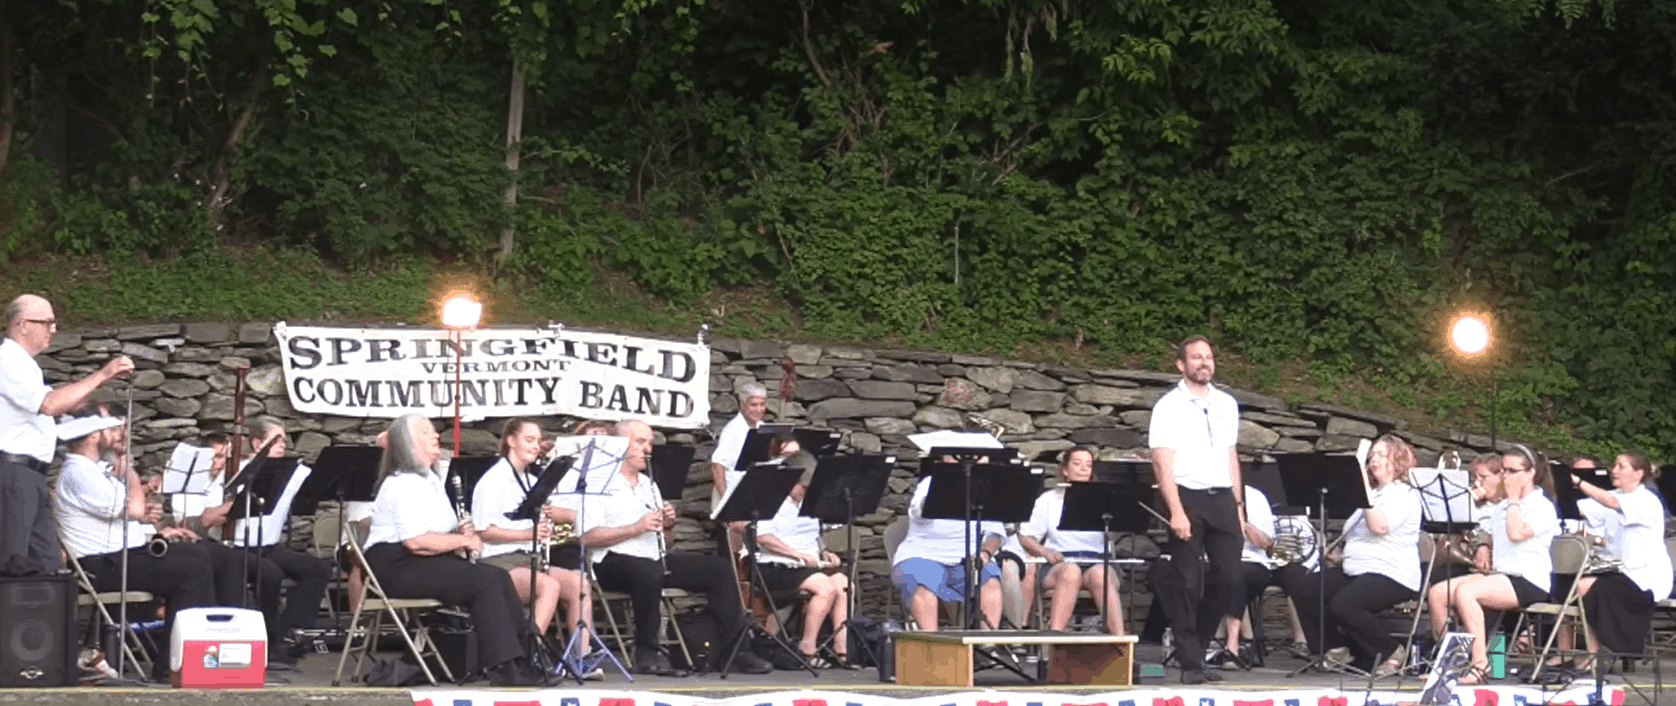 Springfield Community Band performing at Riverside Bandstand for this year’s June 29 concert